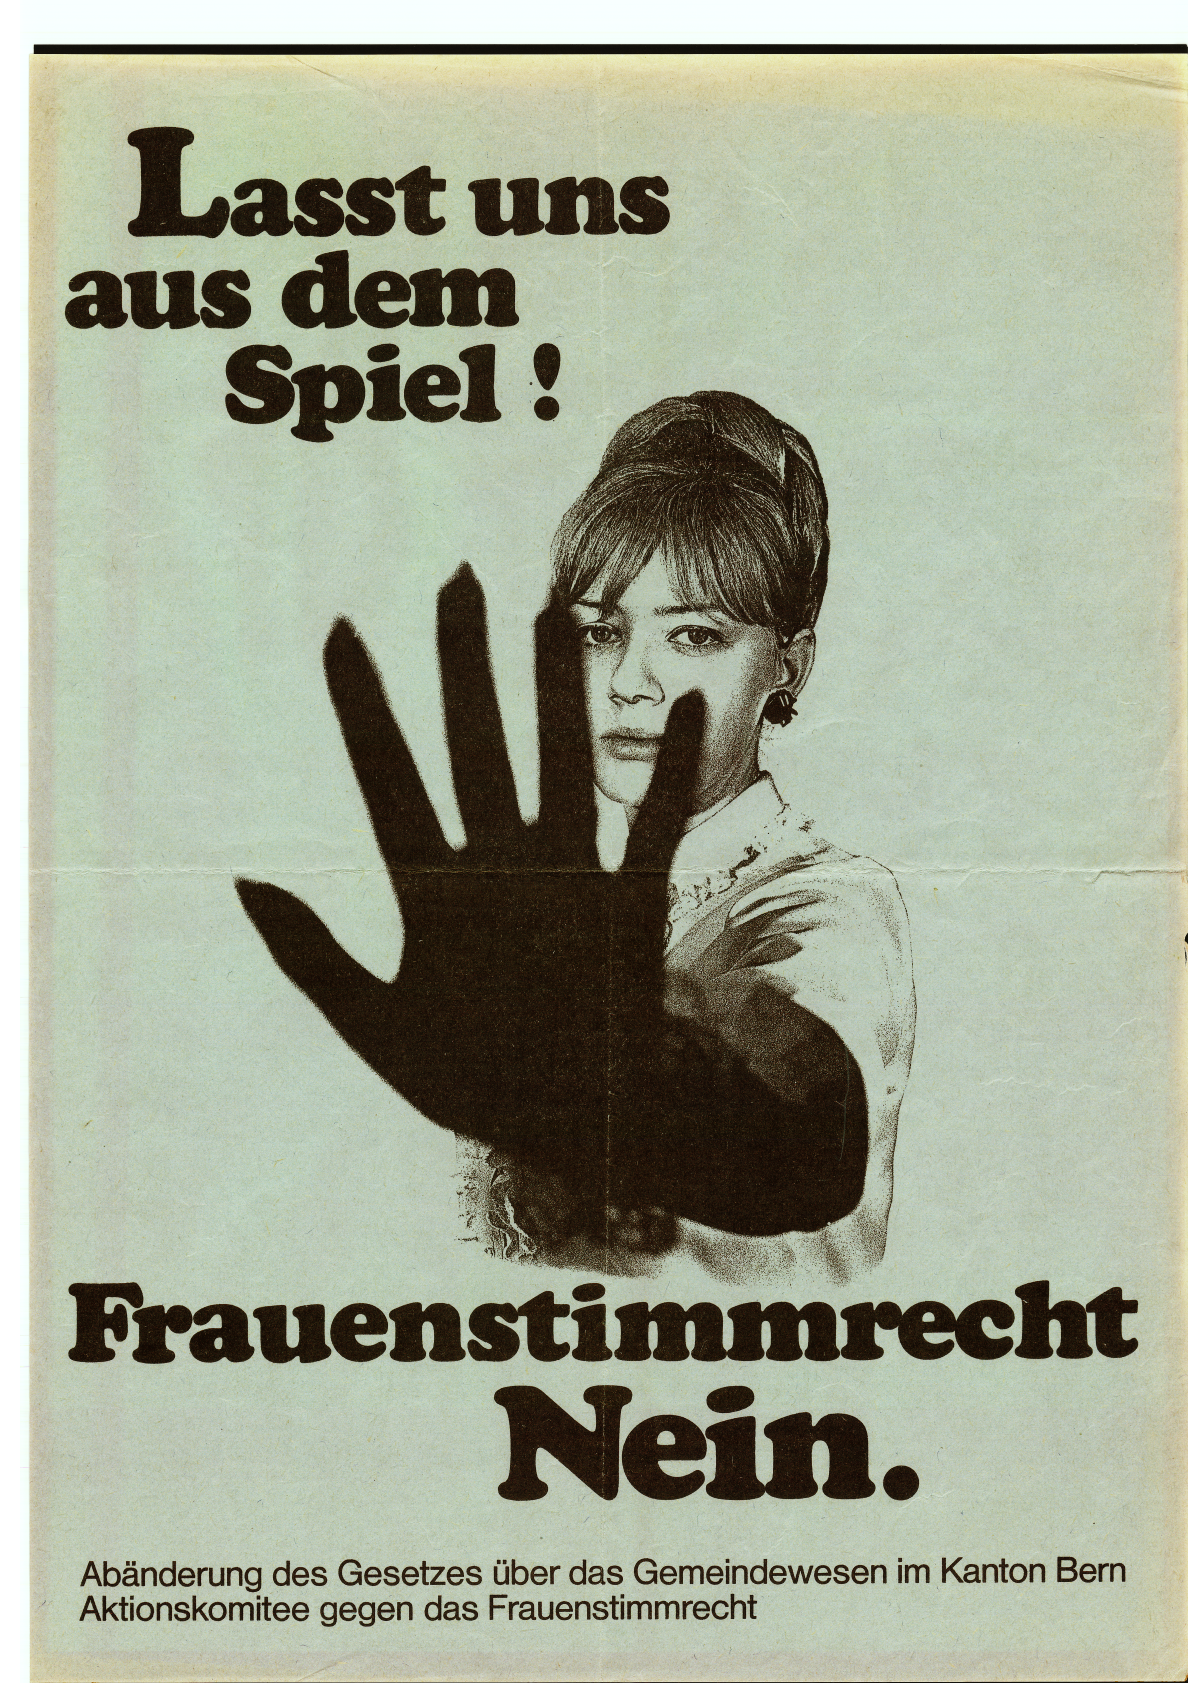 Committee for Action Against the Voting Rights of Women, 1968 © Gosteli Foundation, Poster Collection 